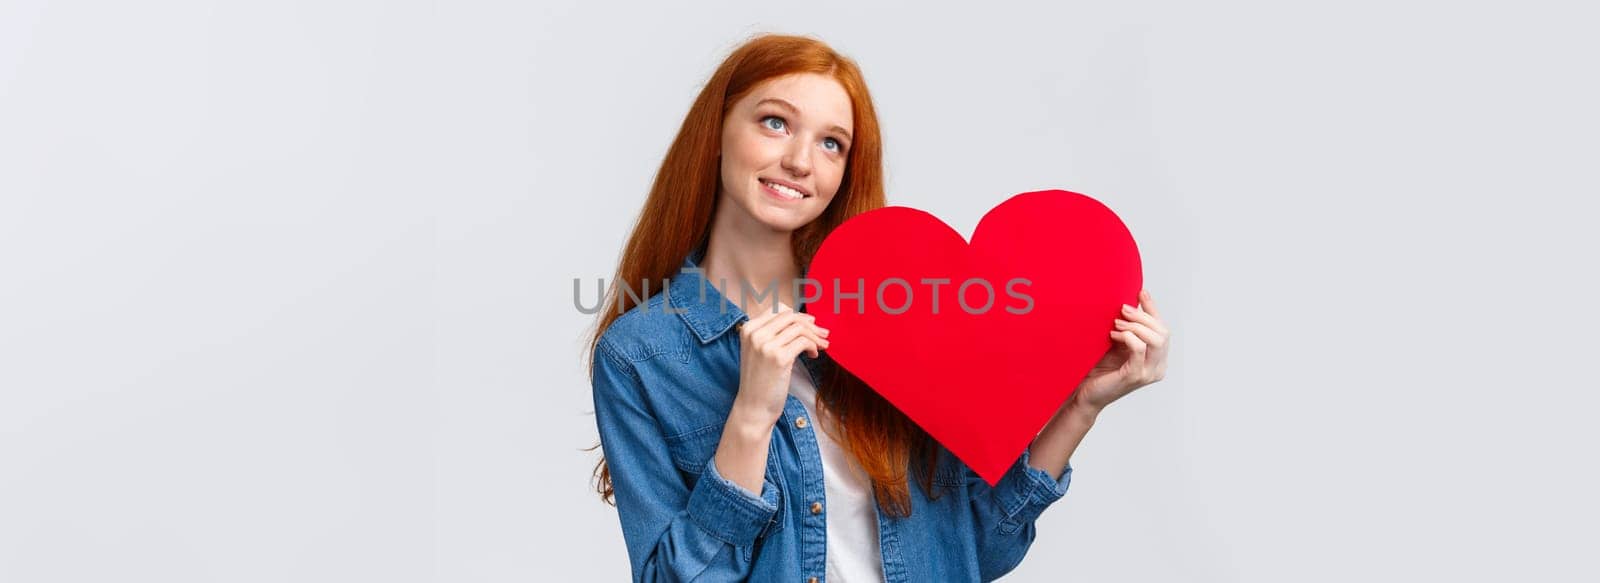 Dreamy, lovely caucasian redhead female dreaming to give valentines day card to lover, looking up thoughtful, imaging scene, holding big red heart and smiling happily, white background.